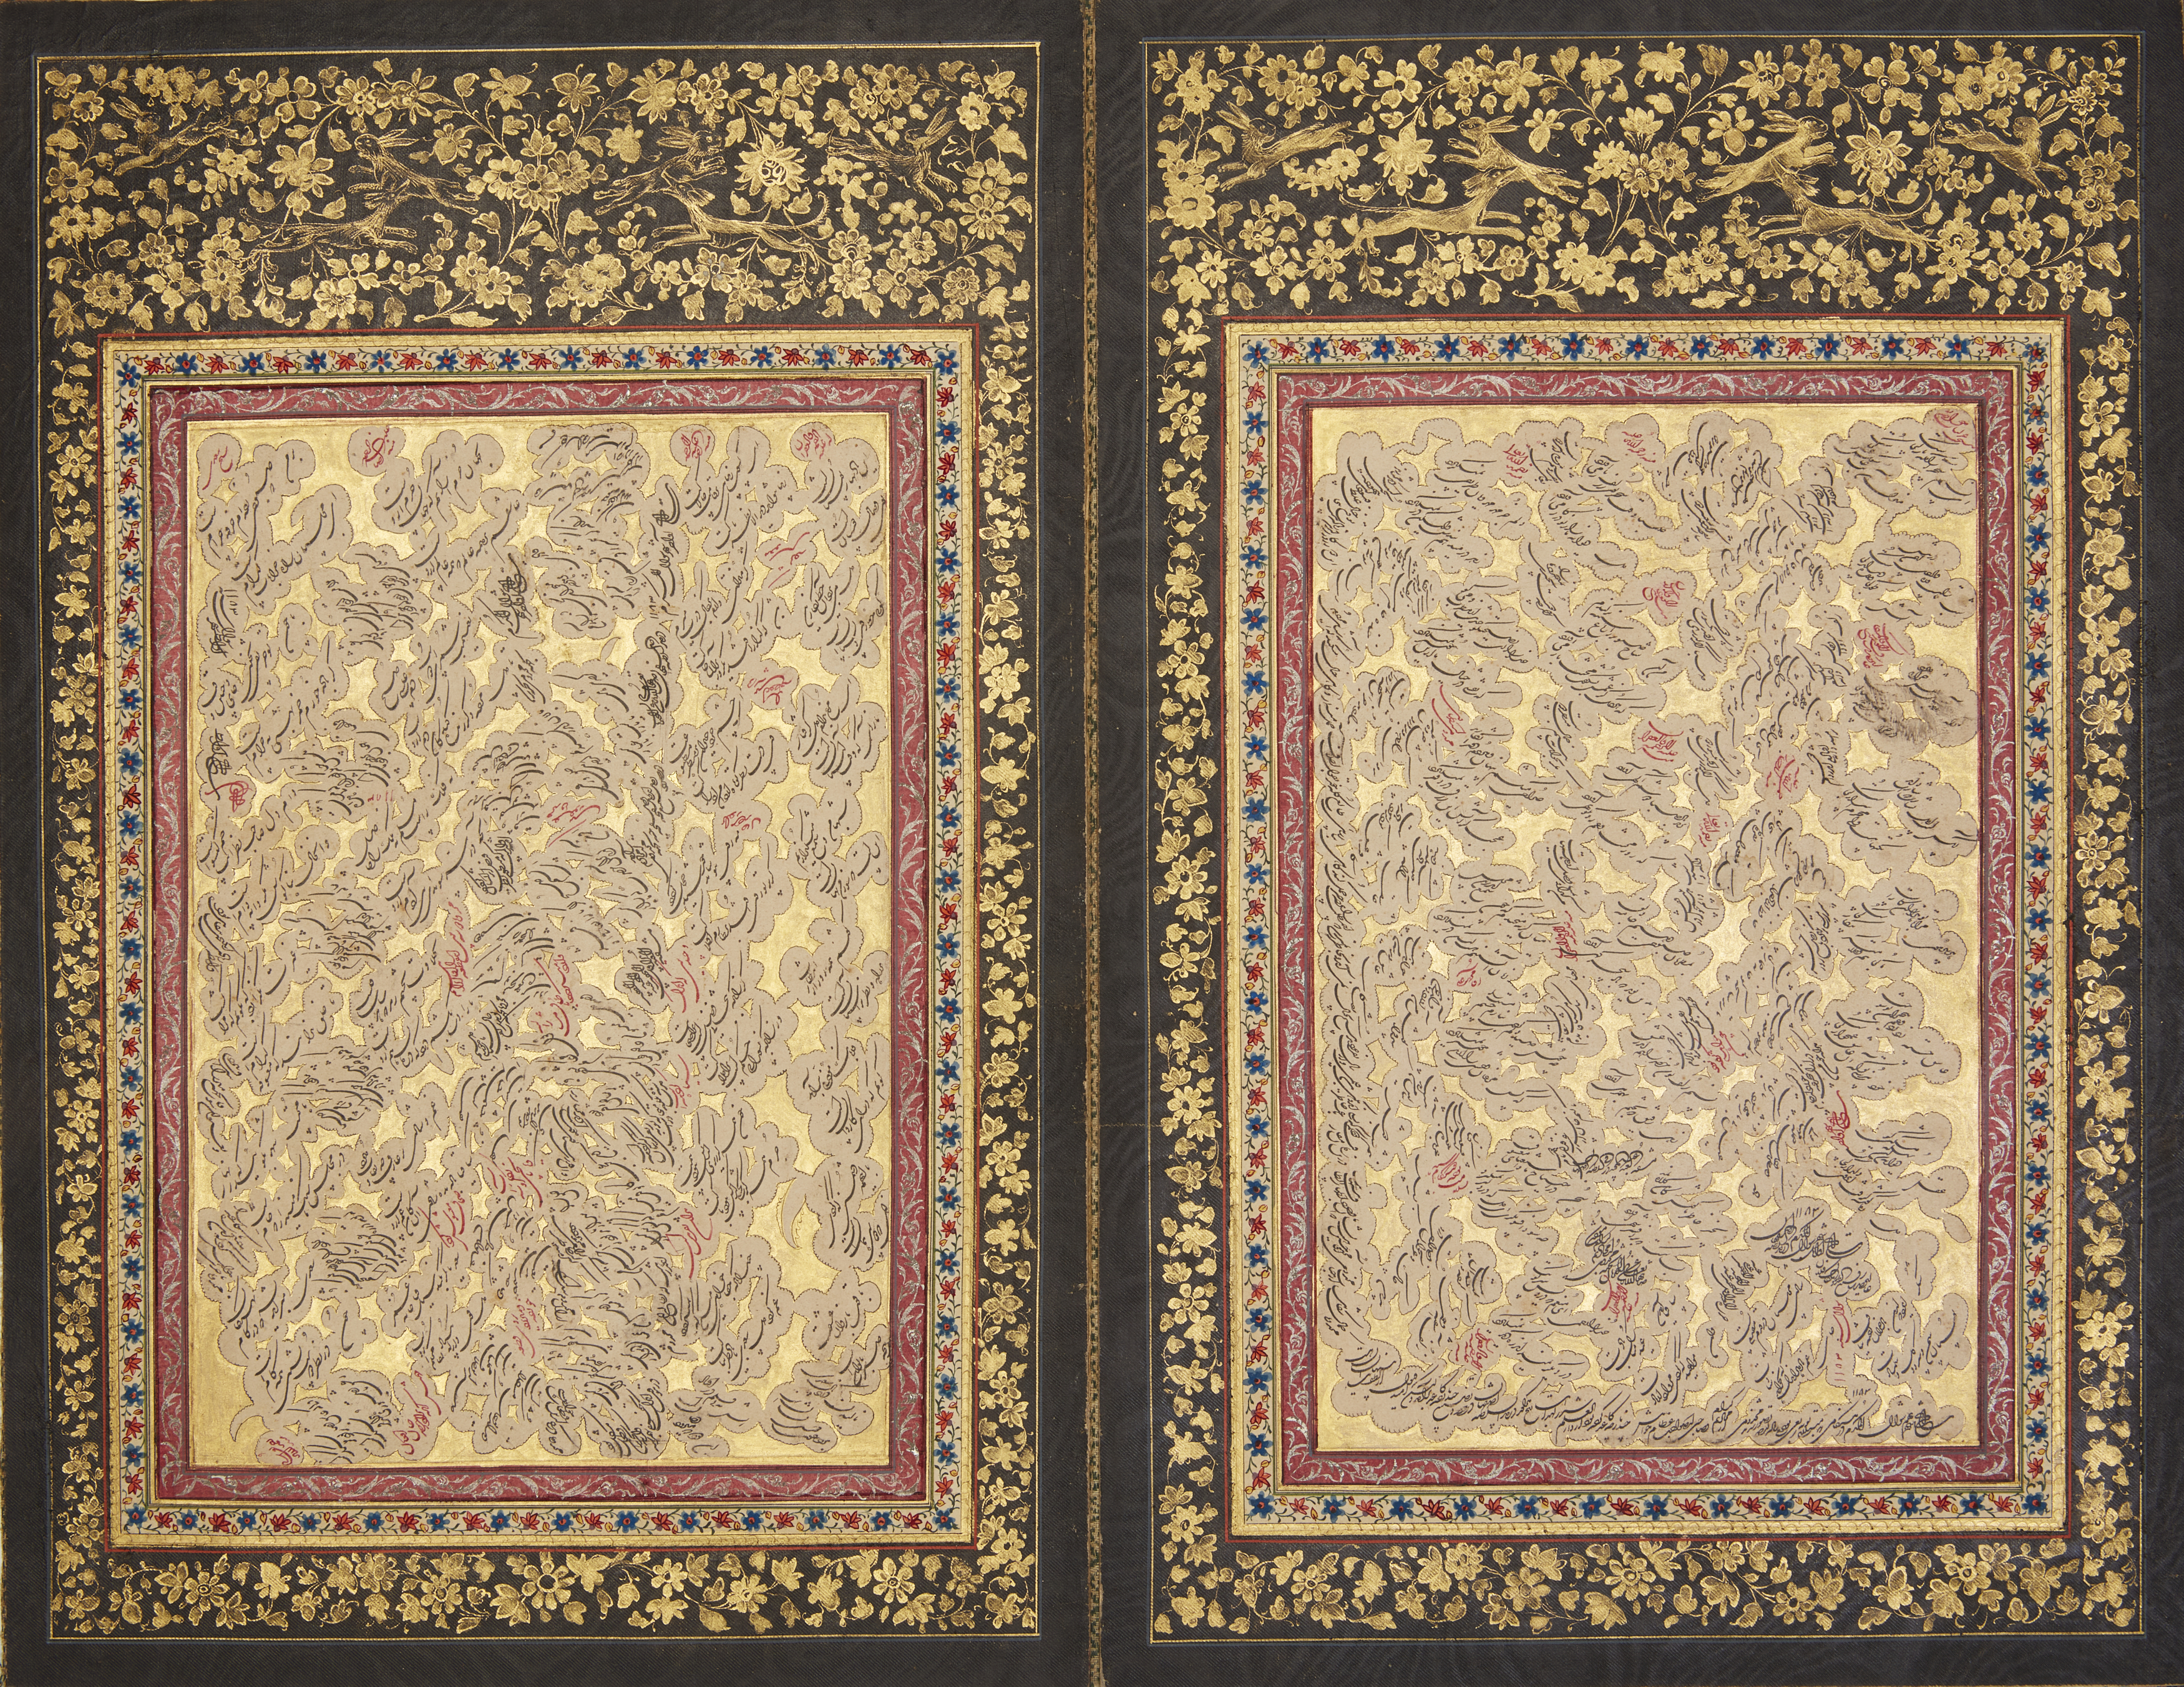 A Zand calligraphic bifolio, Both panels signed and dated 1184AH/1770AD, each in black shikaste...